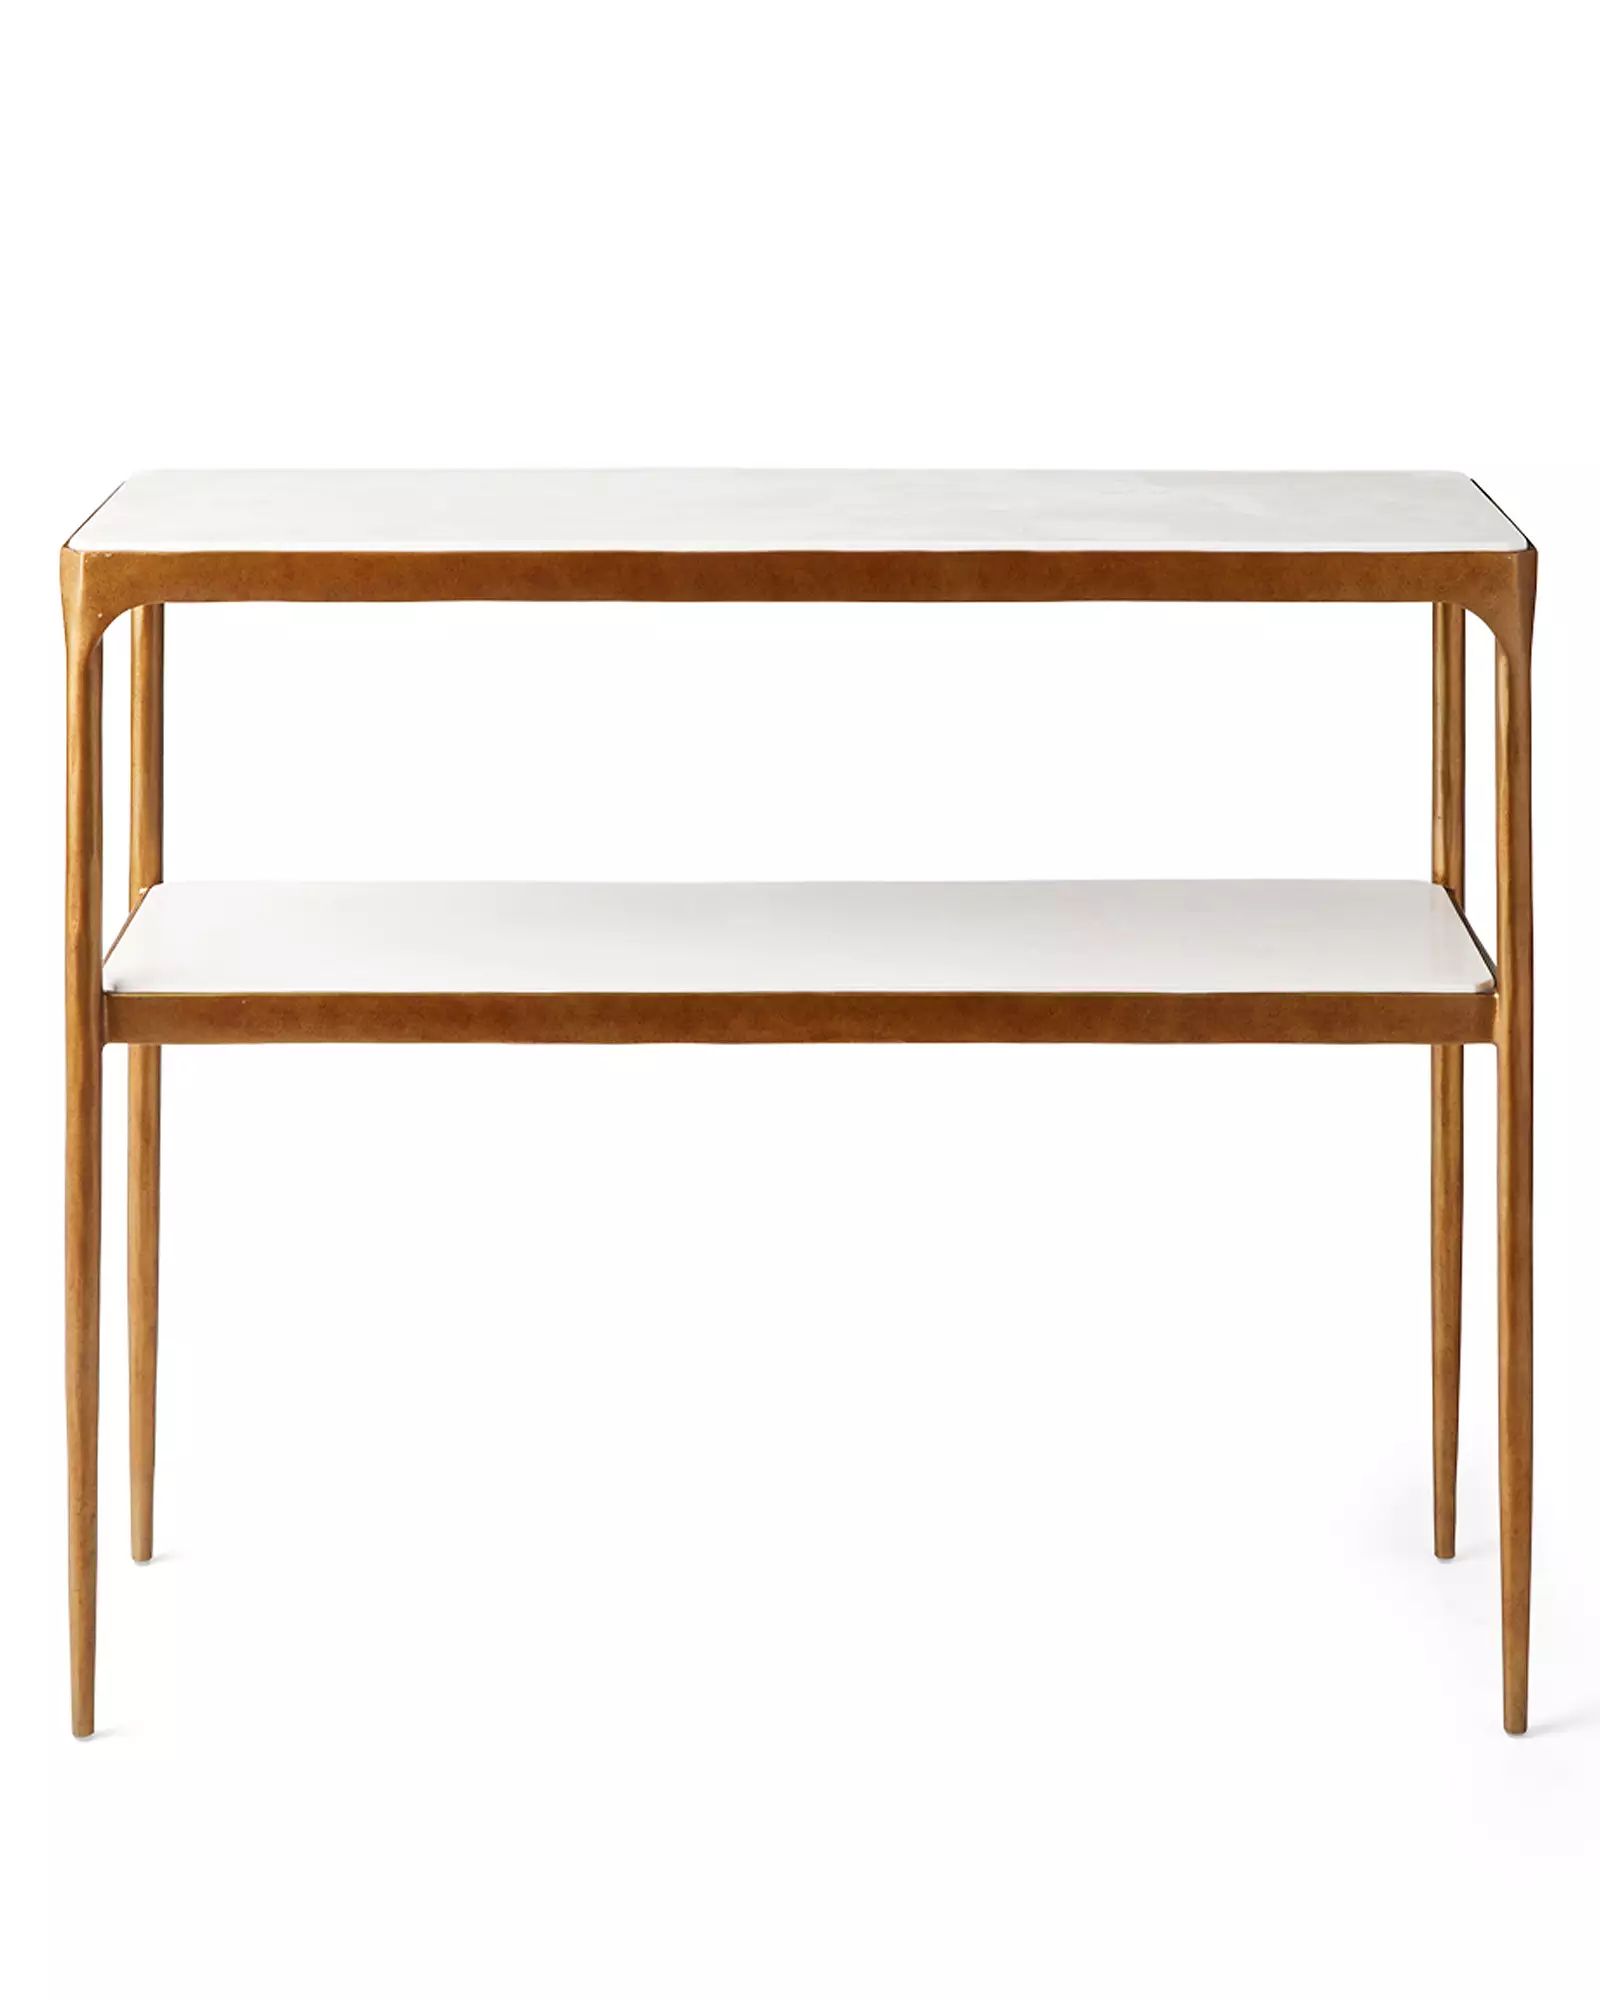 Beaumont Console | Serena and Lily